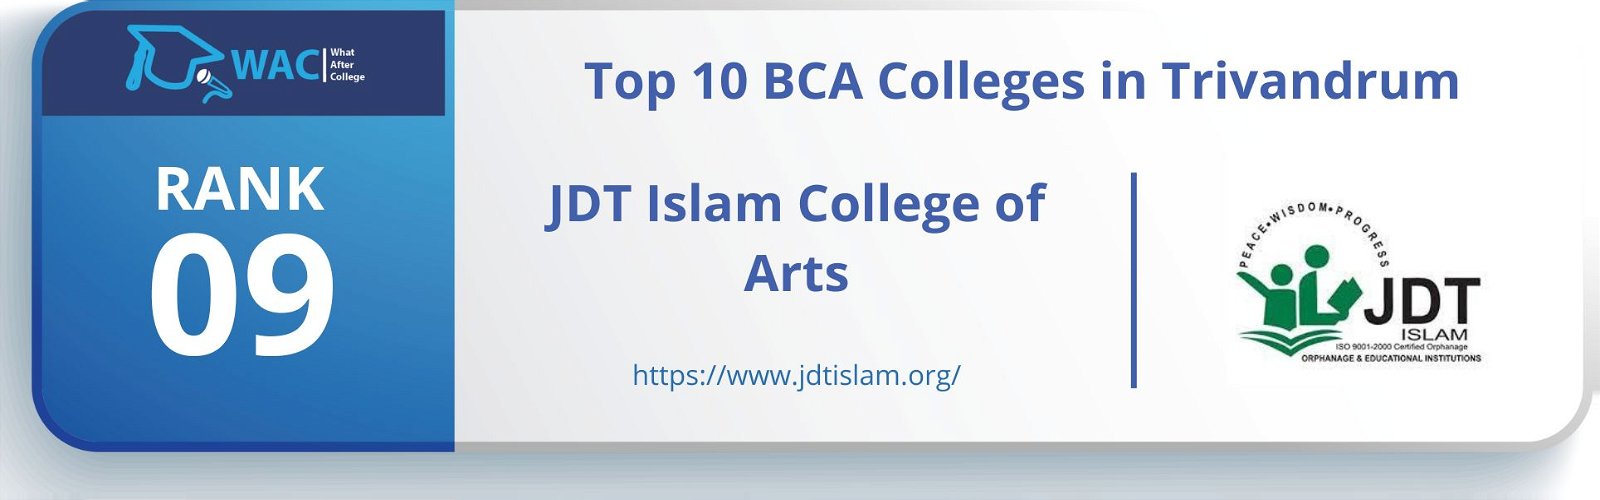 Rank 9: JDT Islam College of Arts And Science 